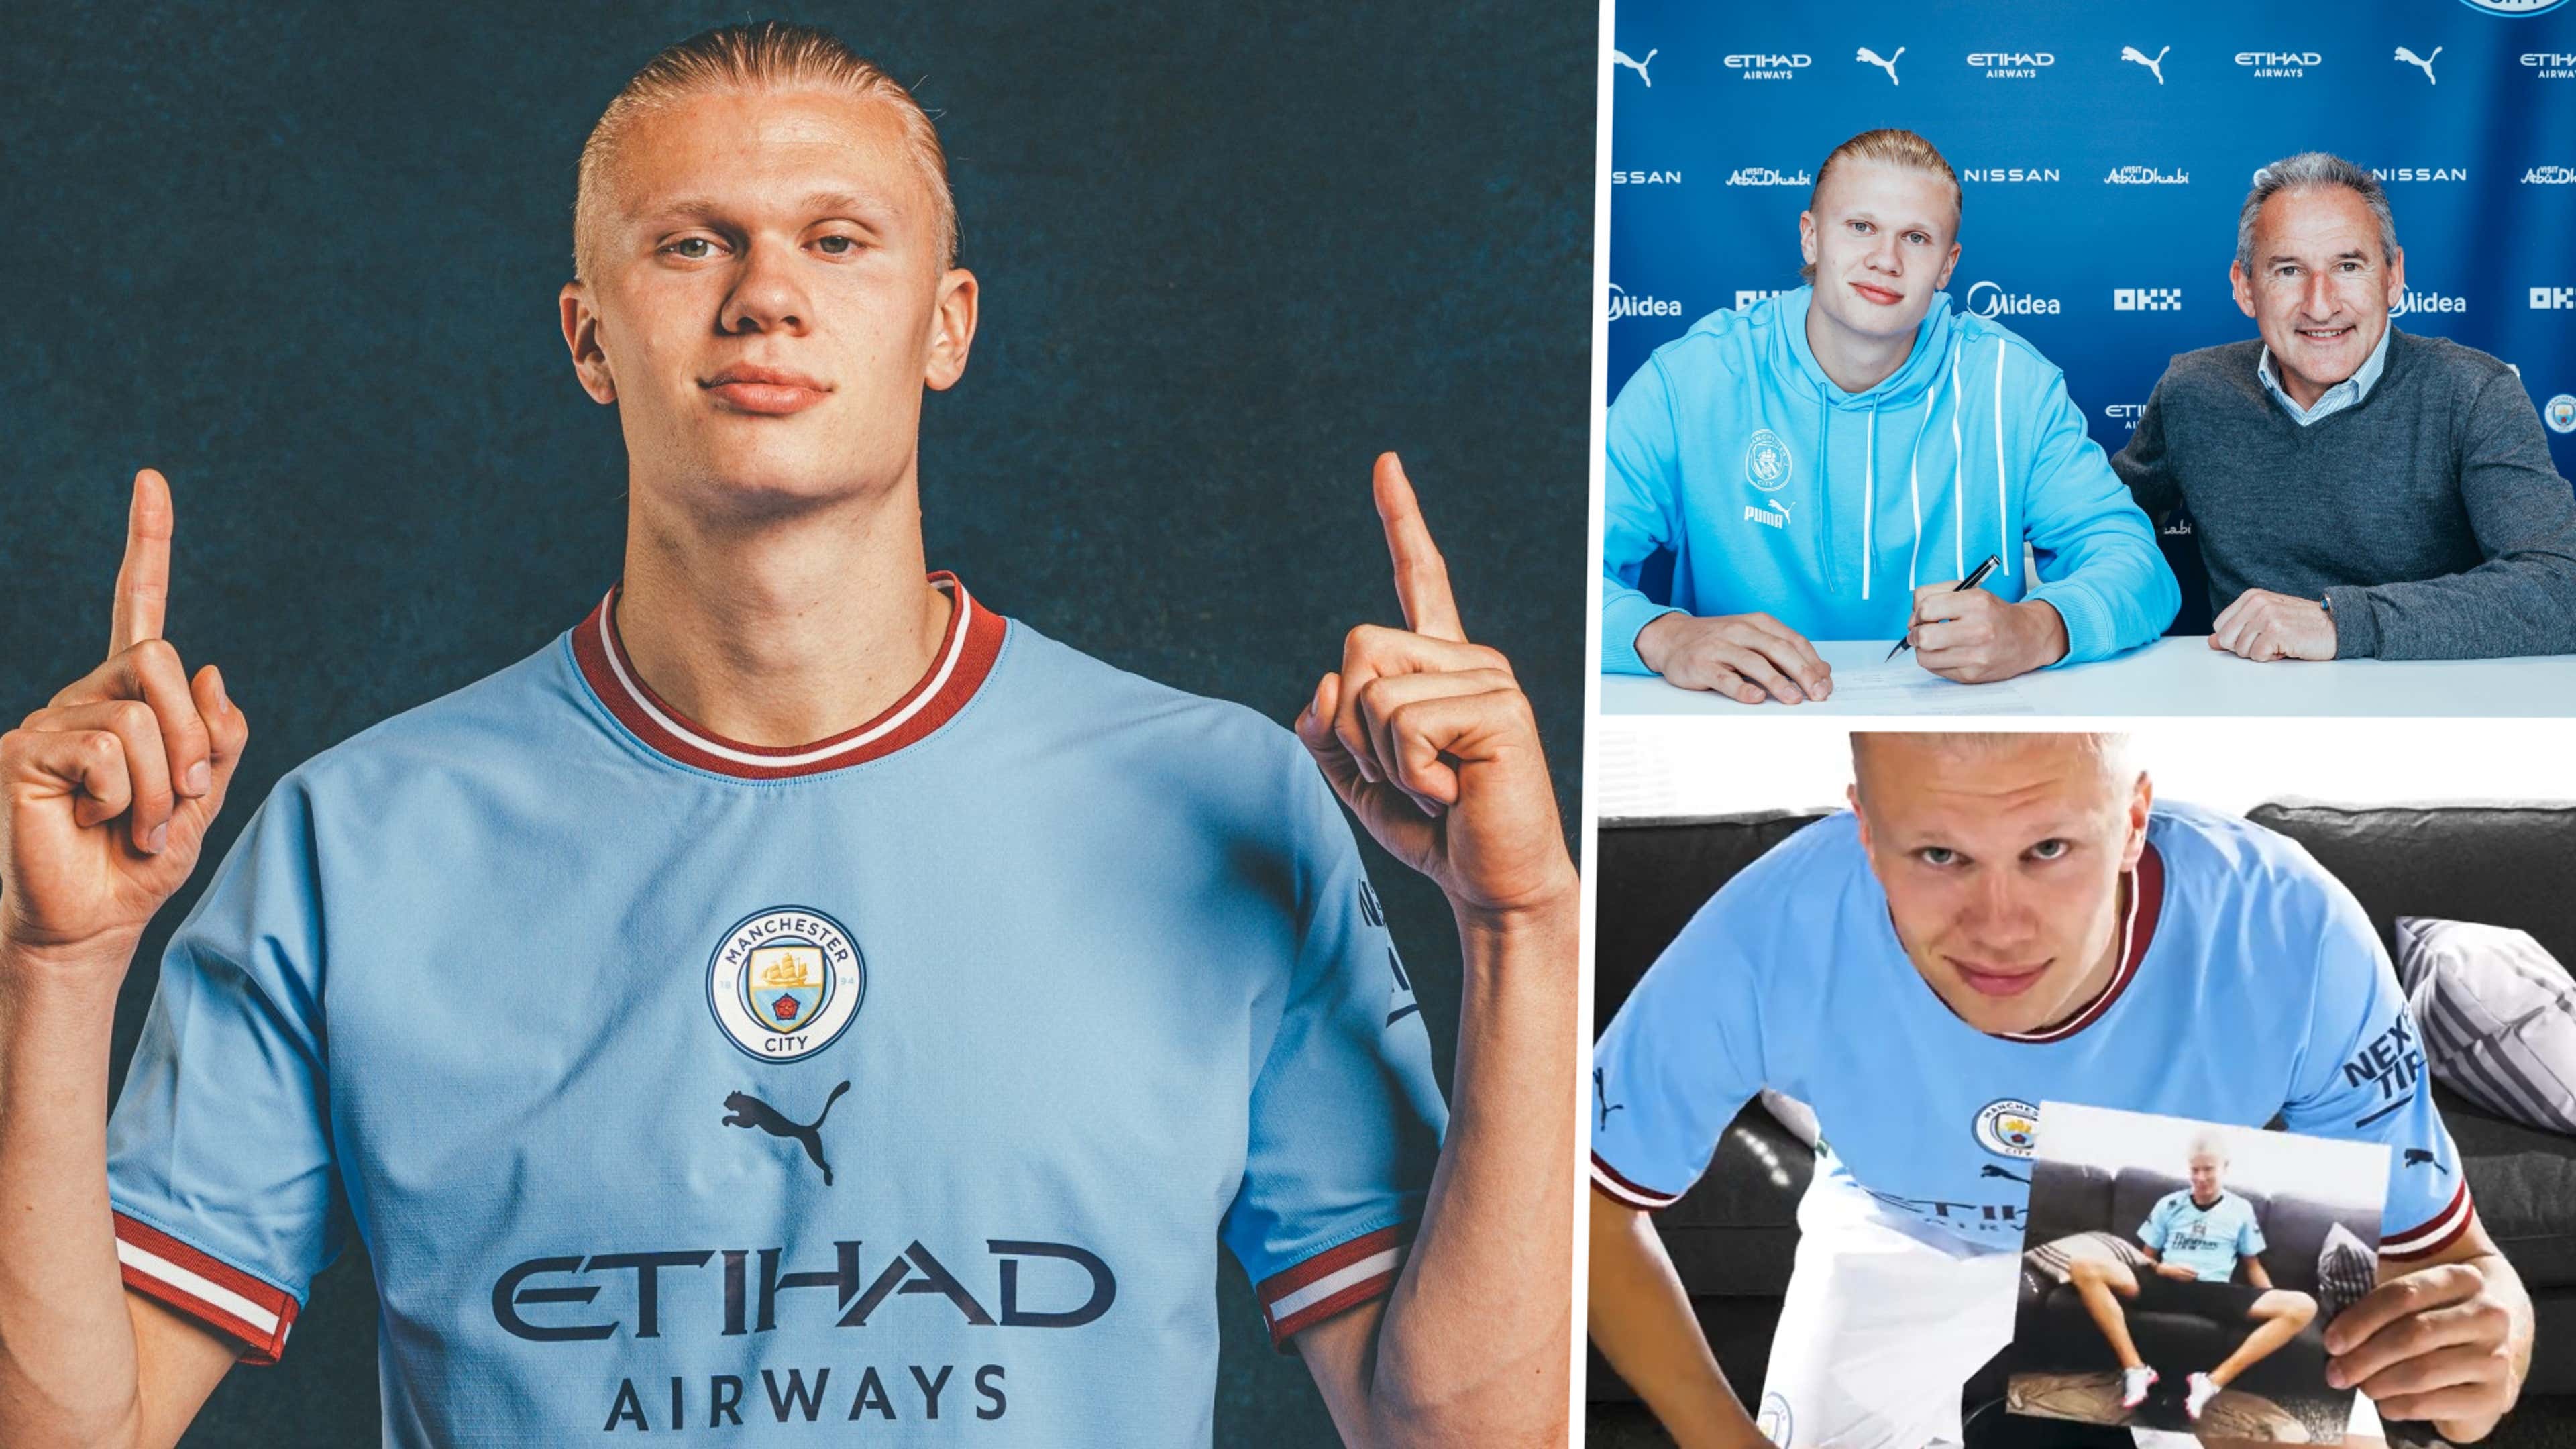 He's finally here! Manchester City unveil £51m new signing Haaland